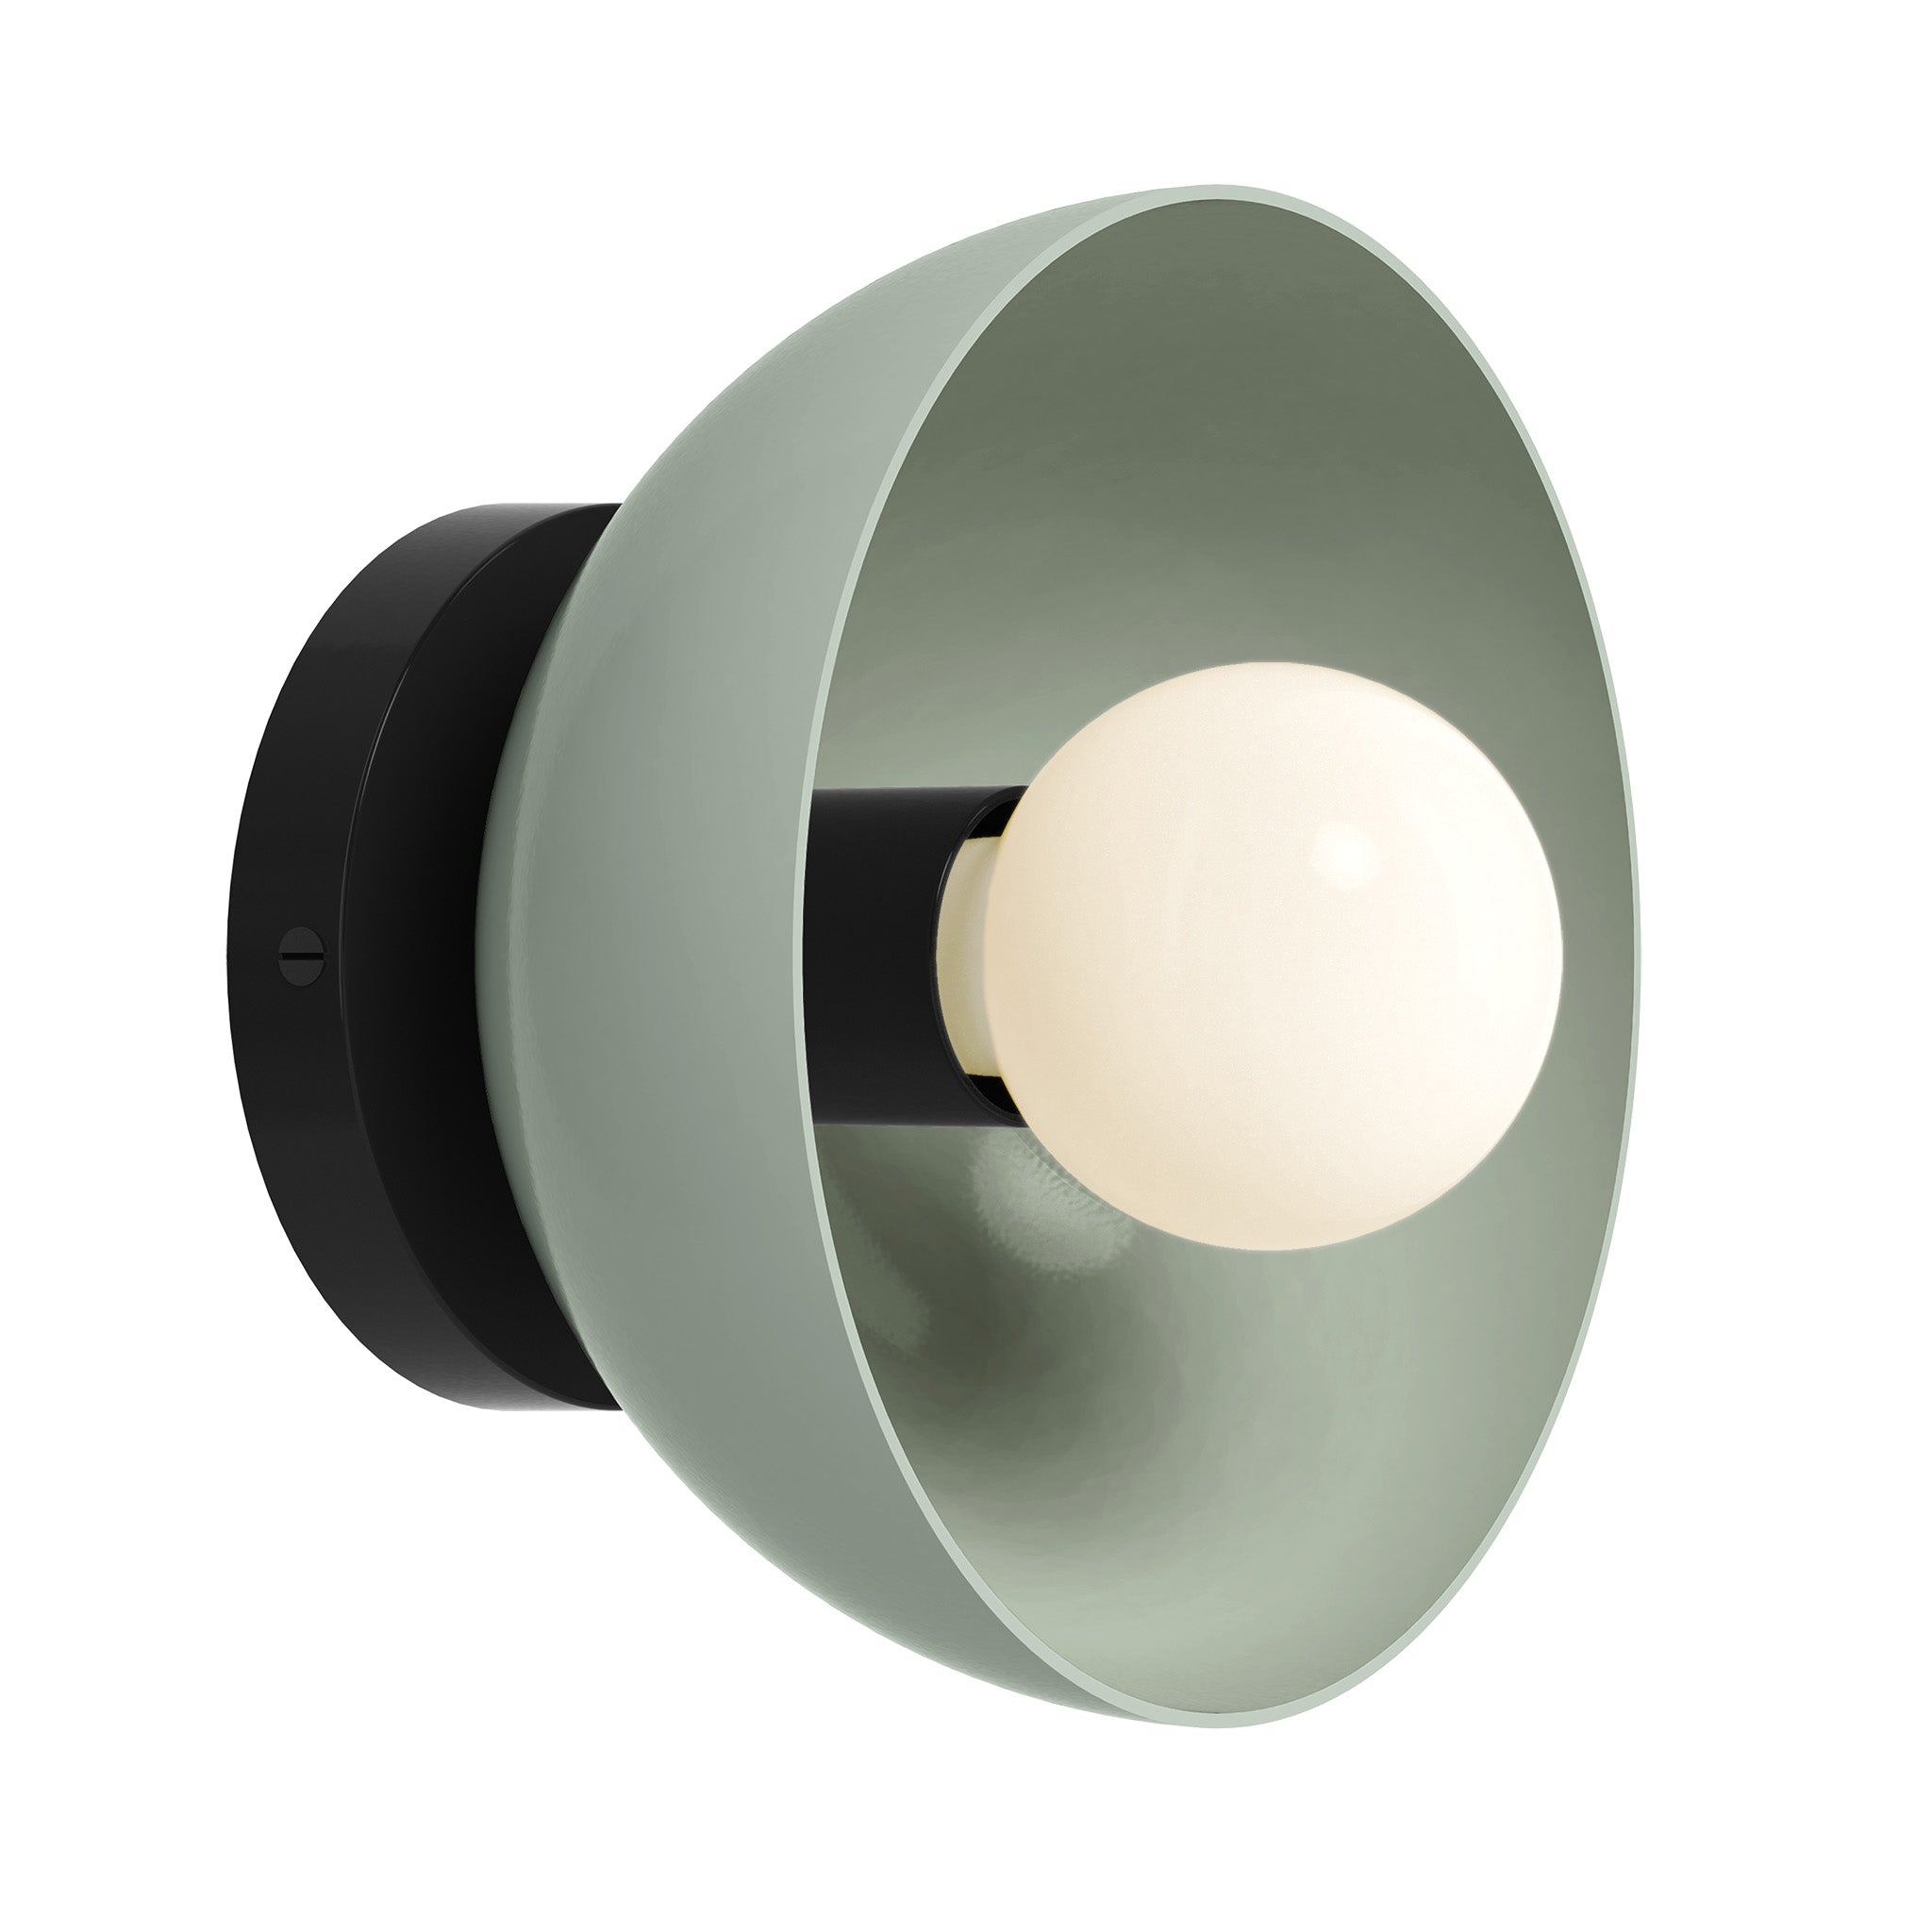 Black and chalk color Hemi sconce 8" Dutton Brown lighting